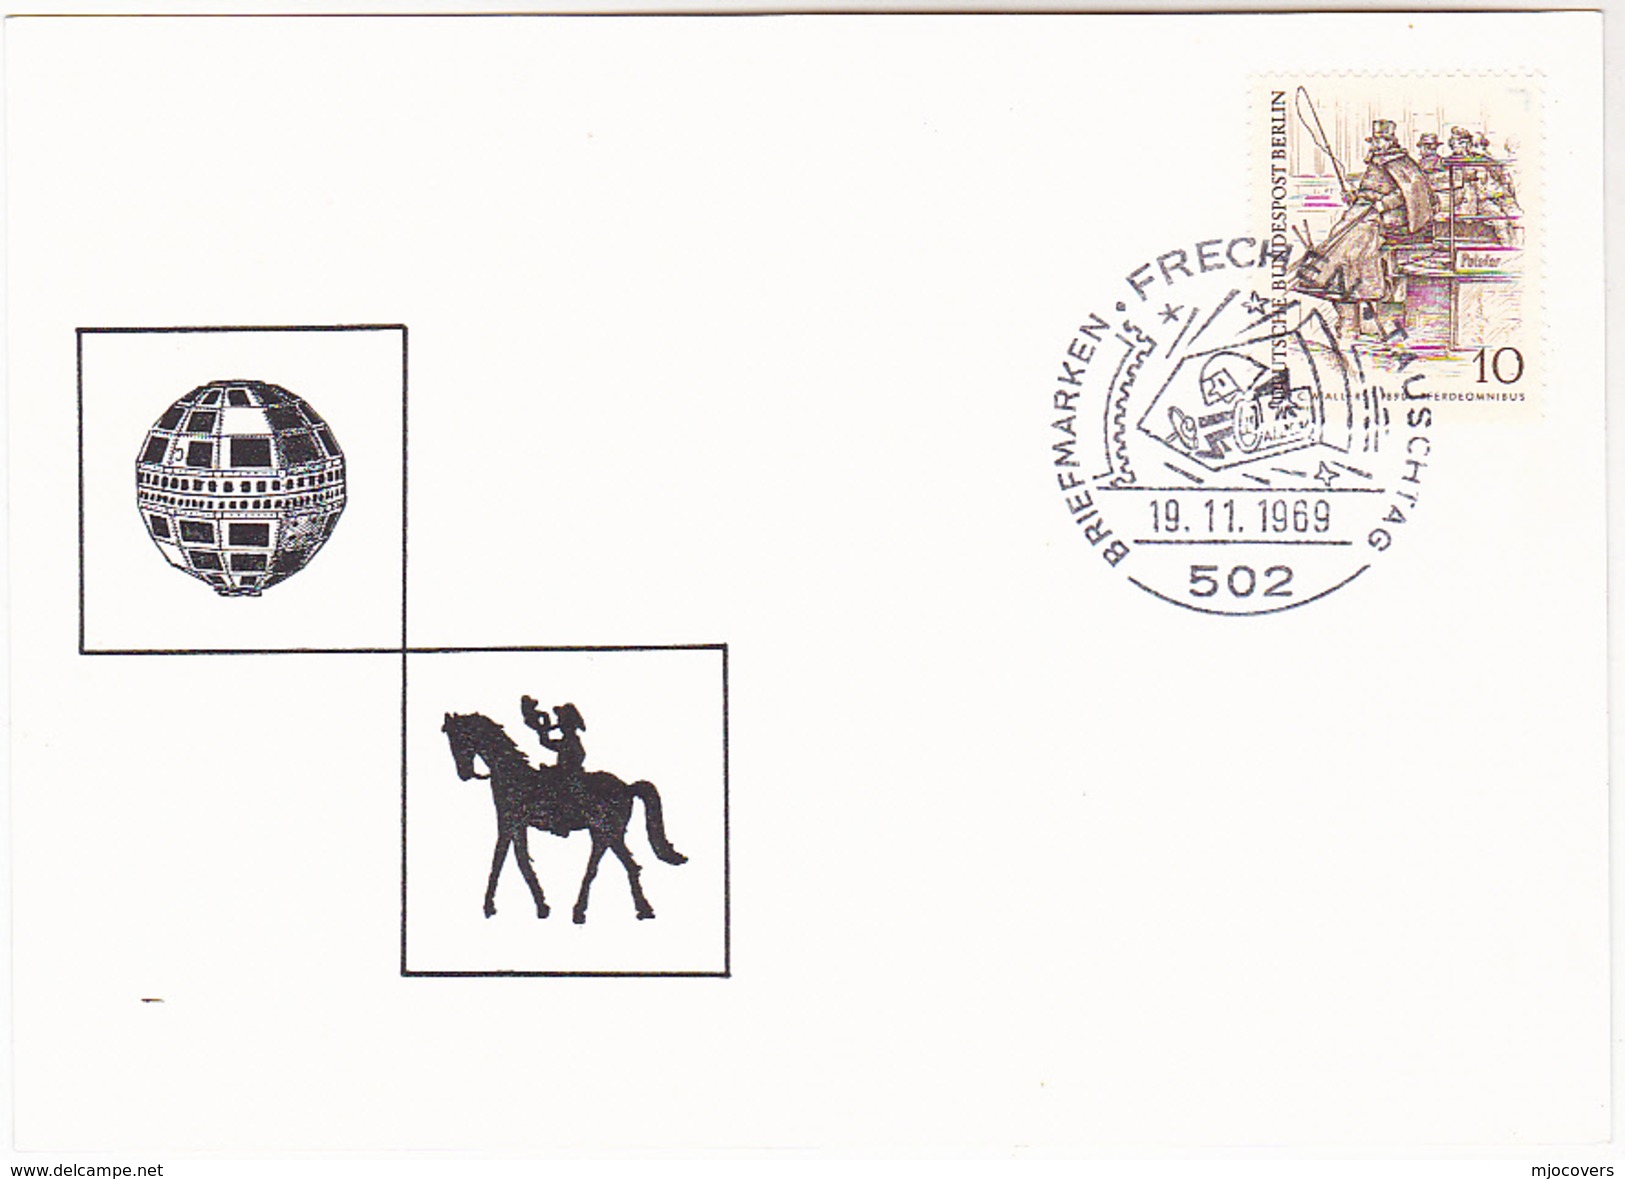 1969 Frechen SPACE EVENT COVER Card Germany Stamps - Europa